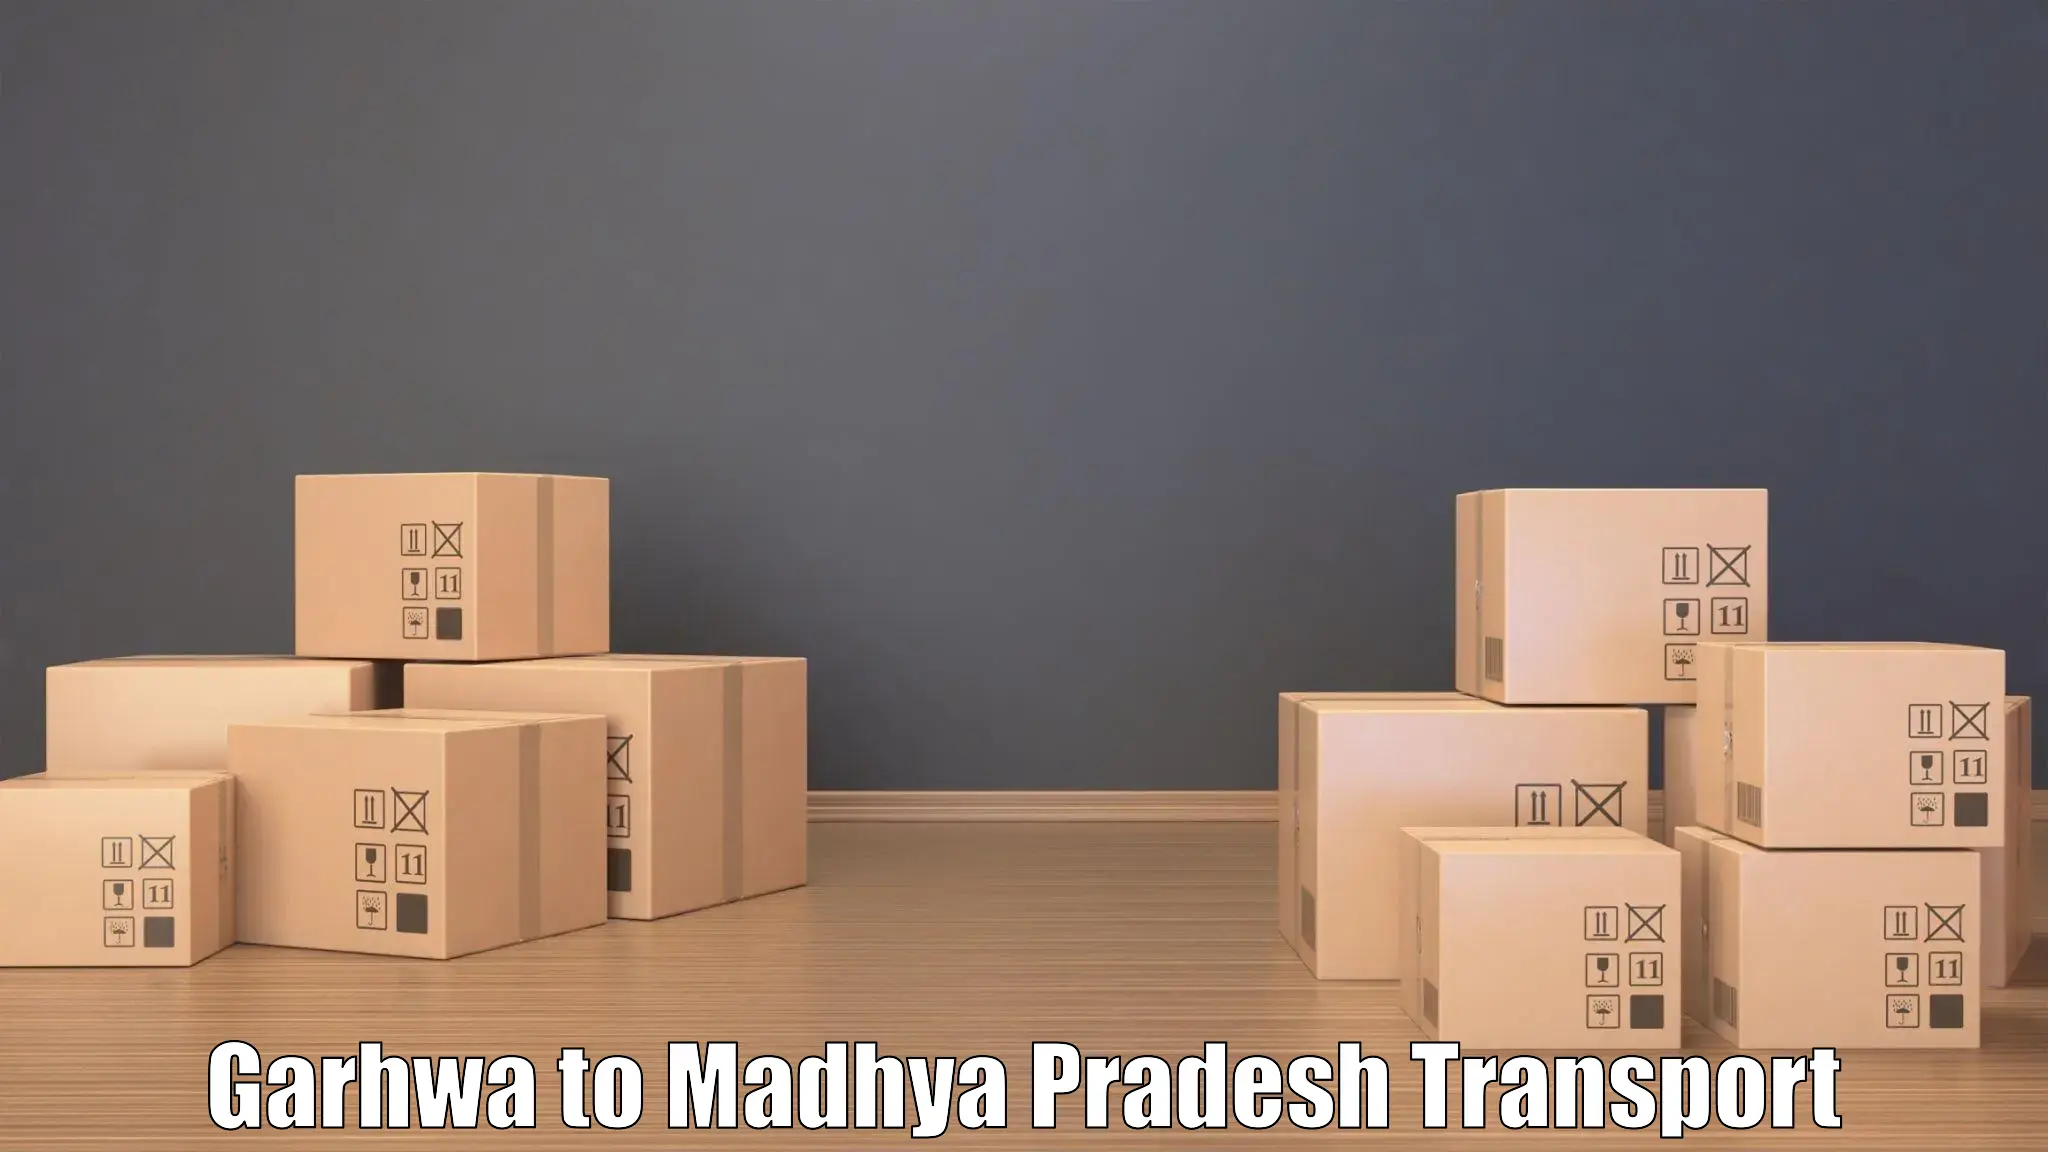 Truck transport companies in India Garhwa to Madwas